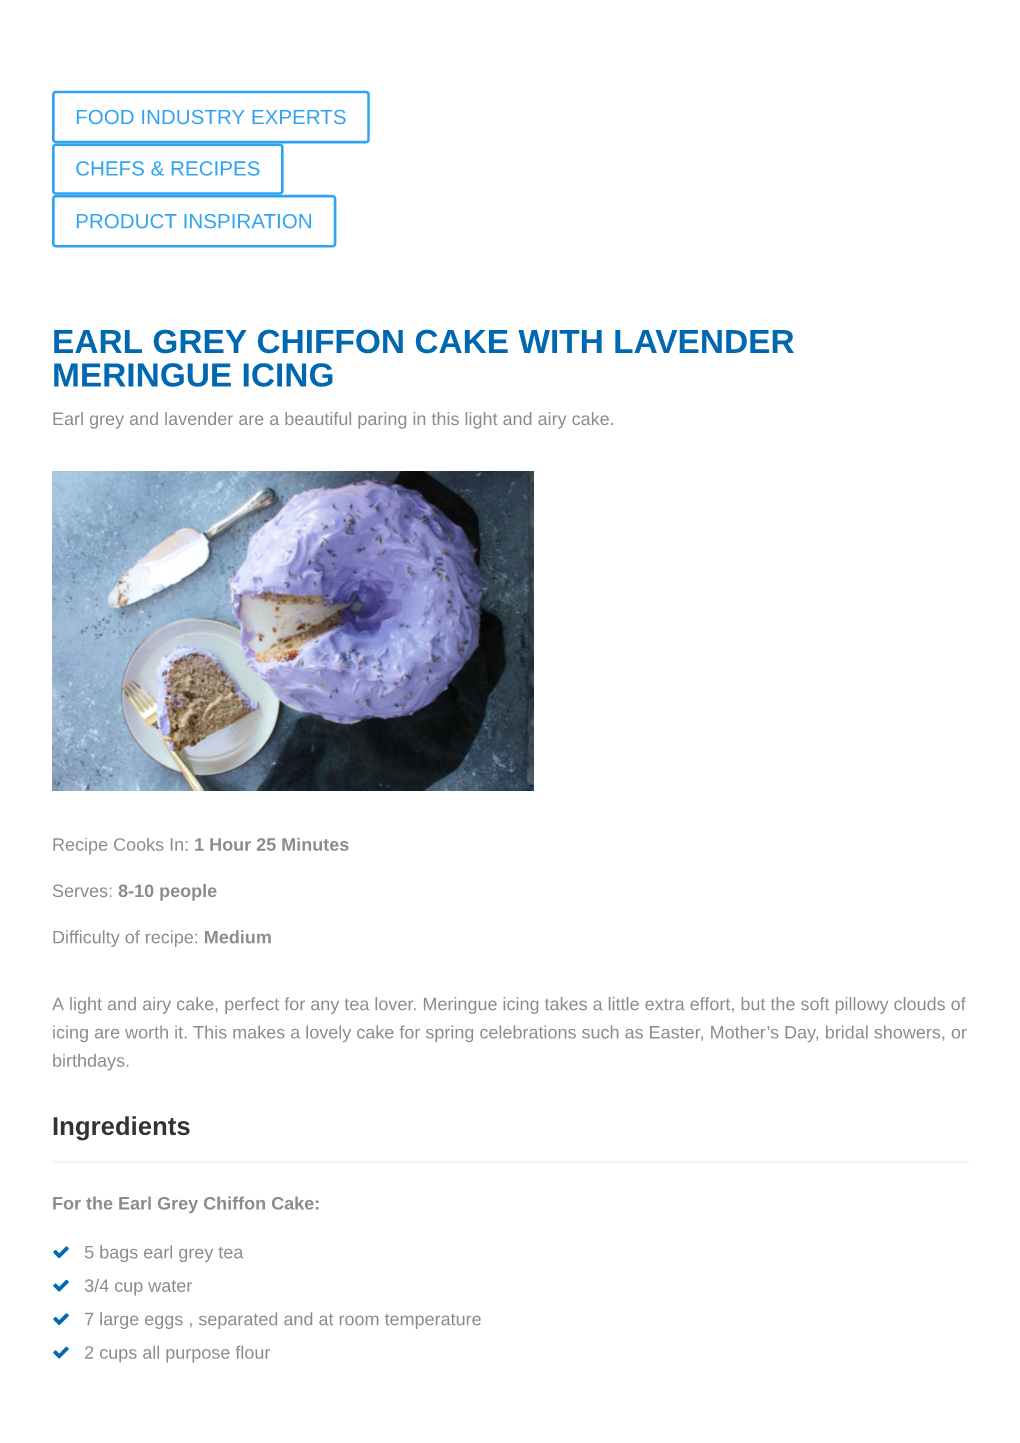 EARL GREY CHIFFON CAKE with LAVENDER MERINGUE ICING Earl Grey and Lavender Are a Beautiful Paring in This Light and Airy Cake